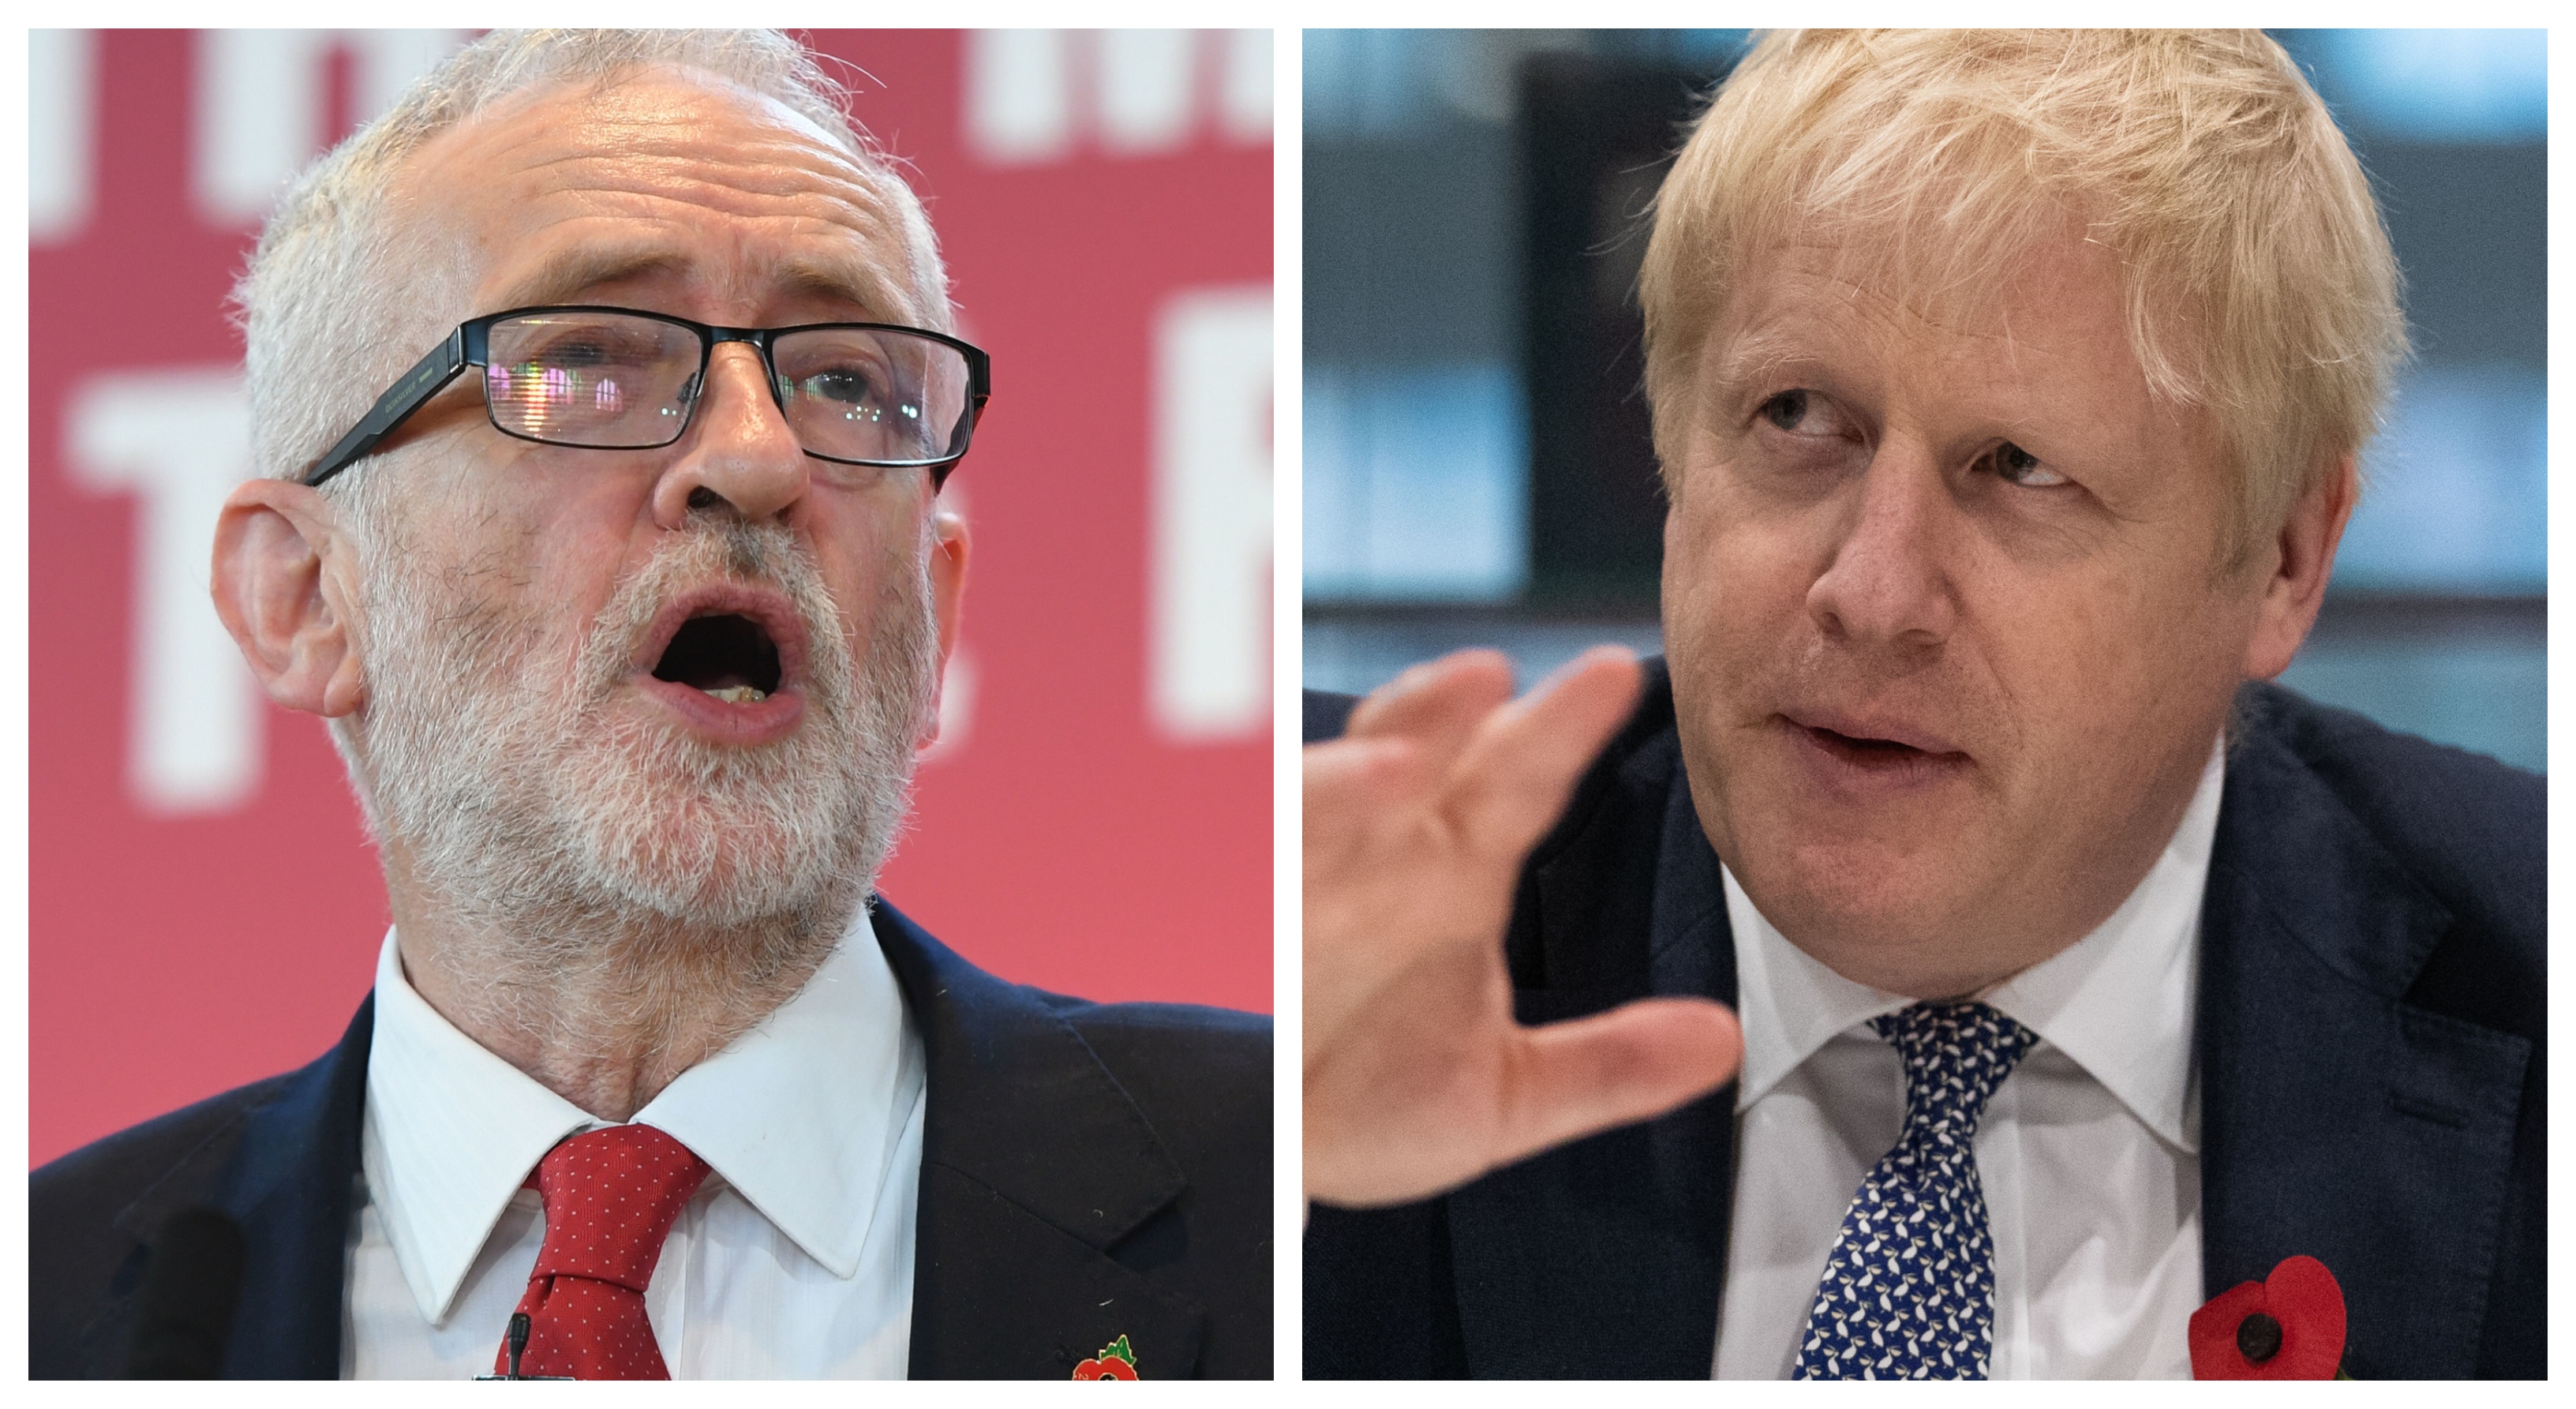 Jeremy Corbyn and Boris Johnson will face each other in a live TV debate